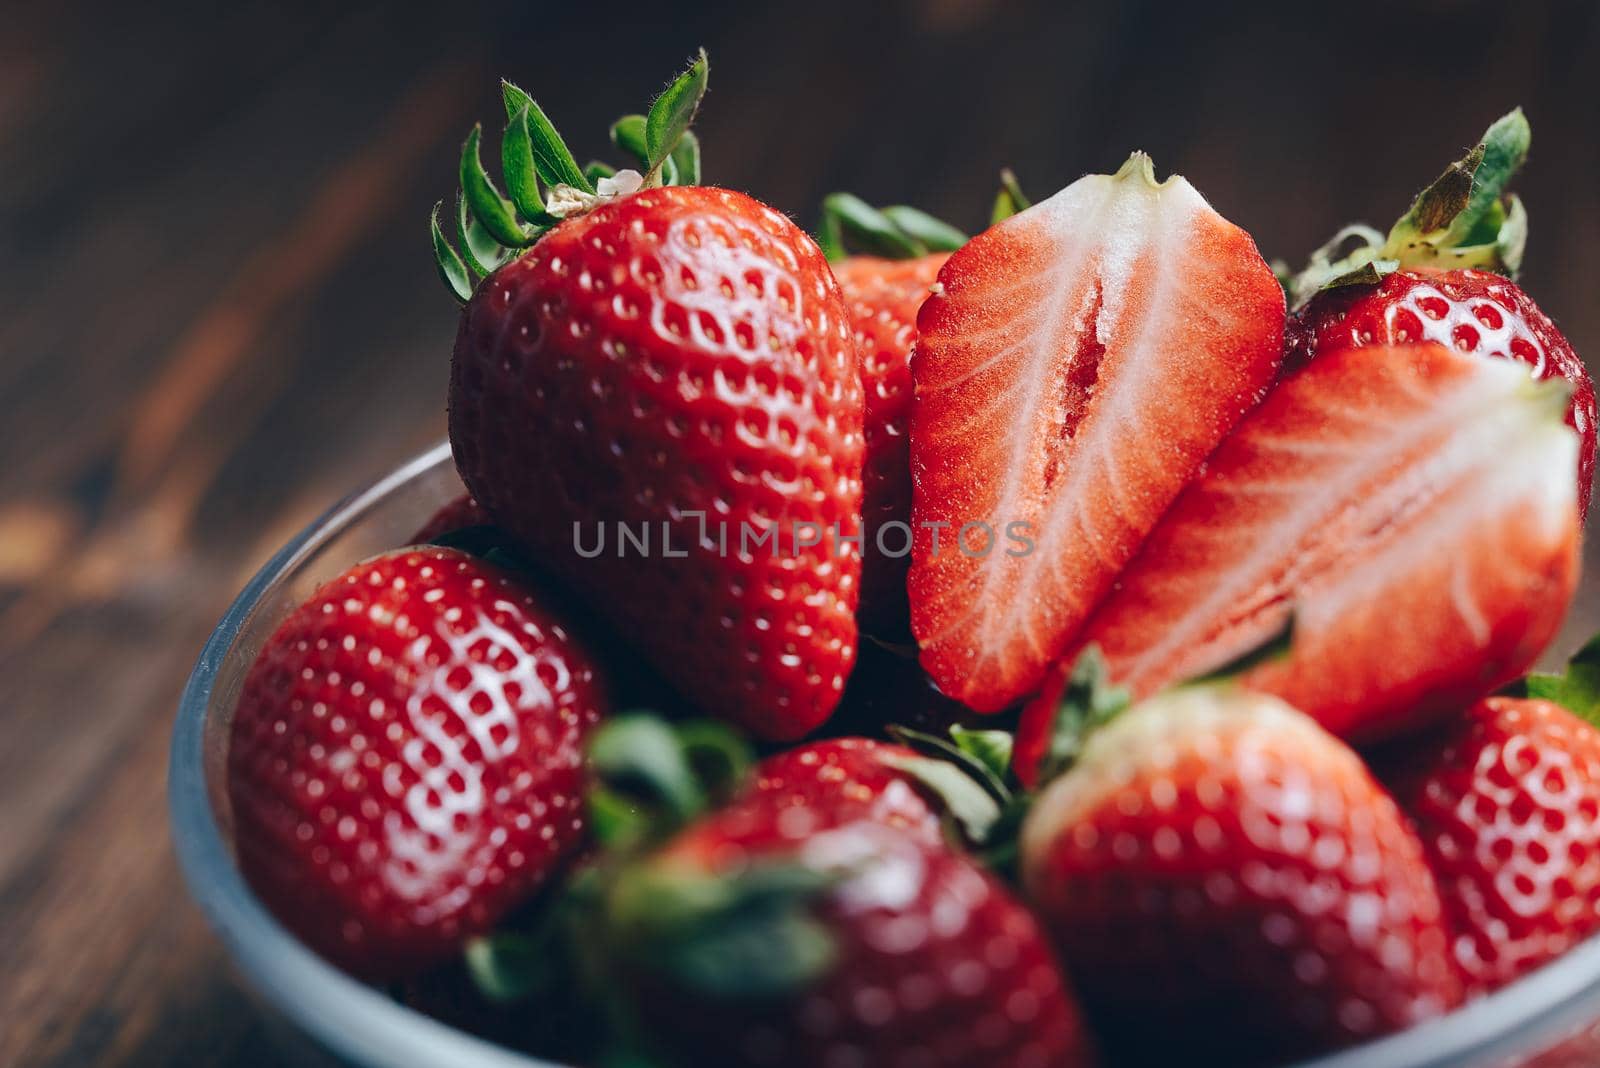 Fresh strawberries in a glass bowl on wooden background in rustic style, healthy sweet food, vitamins and fruity concept. Selective focus